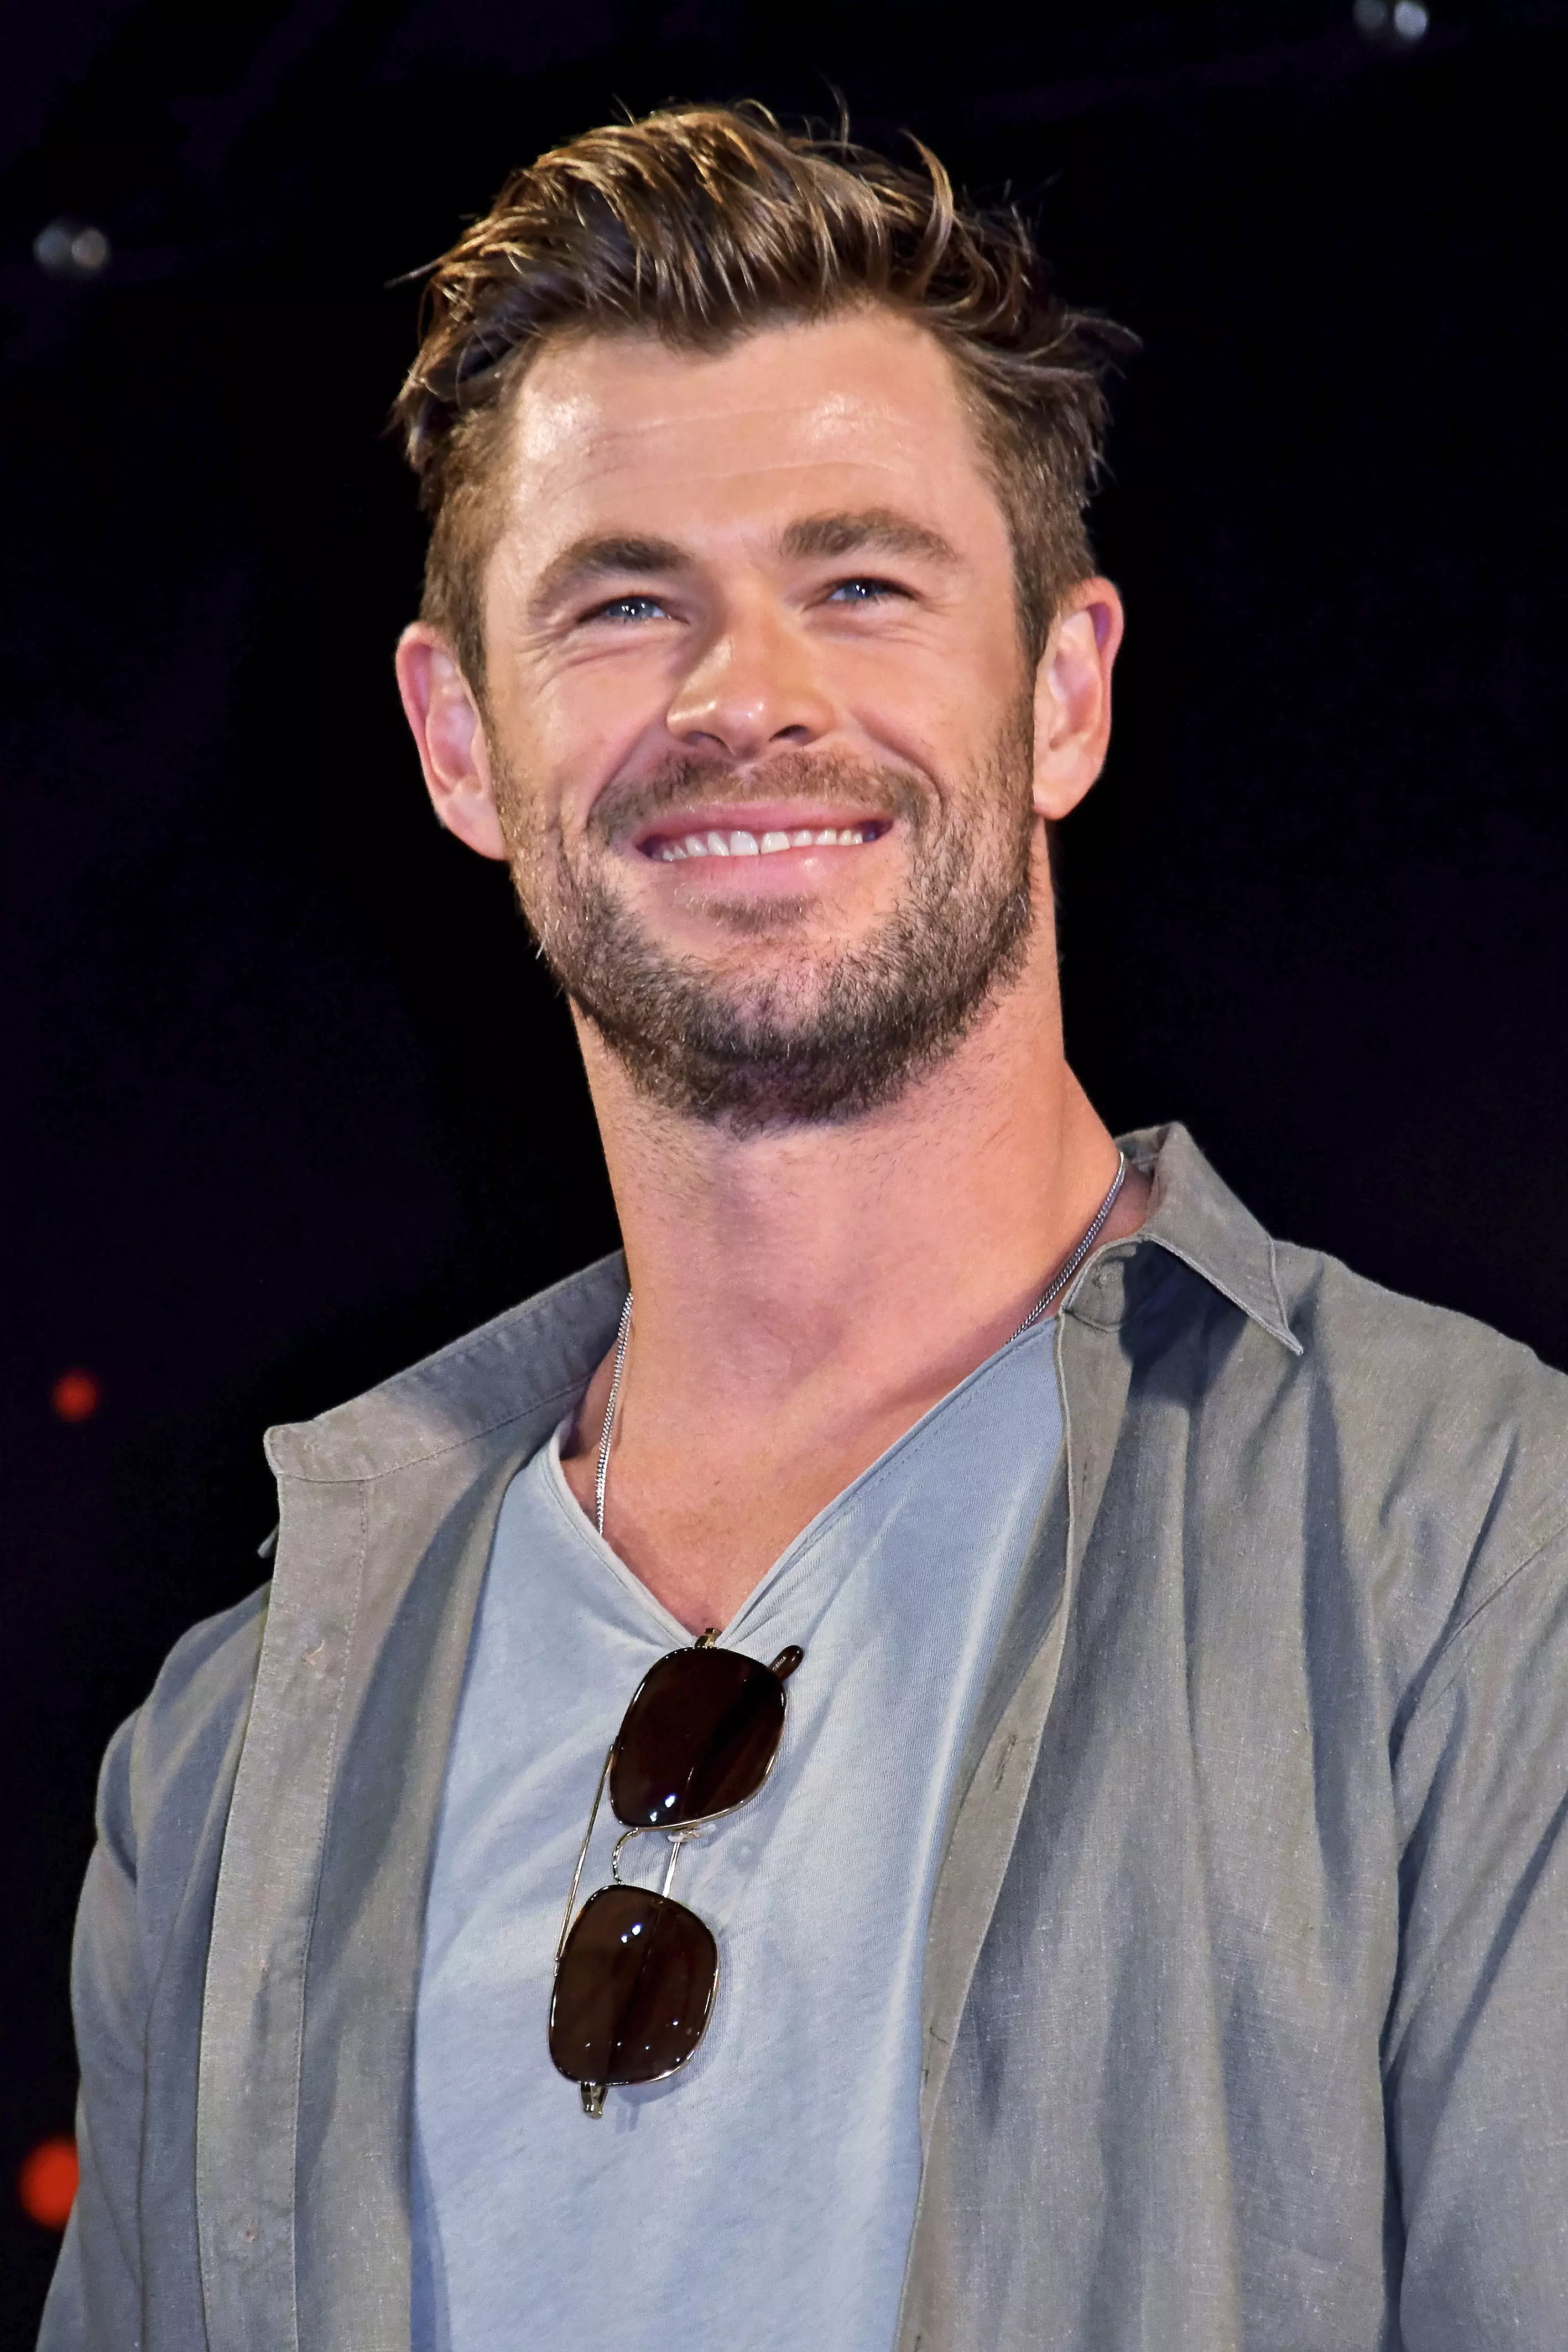 Chris Hemsworth says he's not ready to stop playing Thor just yet.